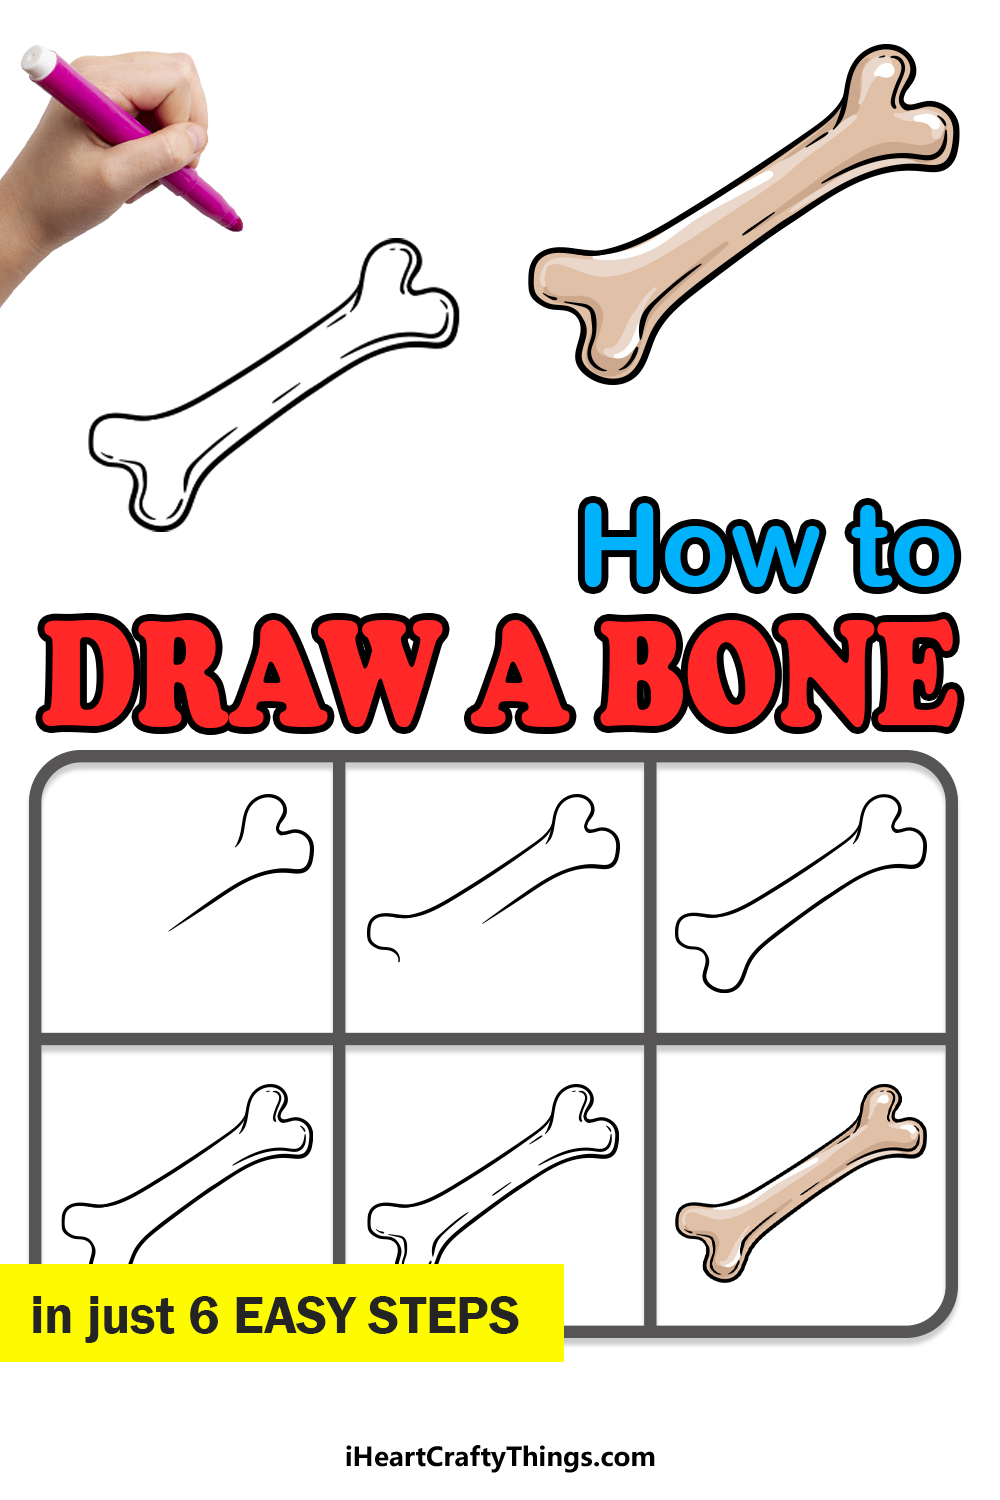 how to draw a bone in 6 easy steps